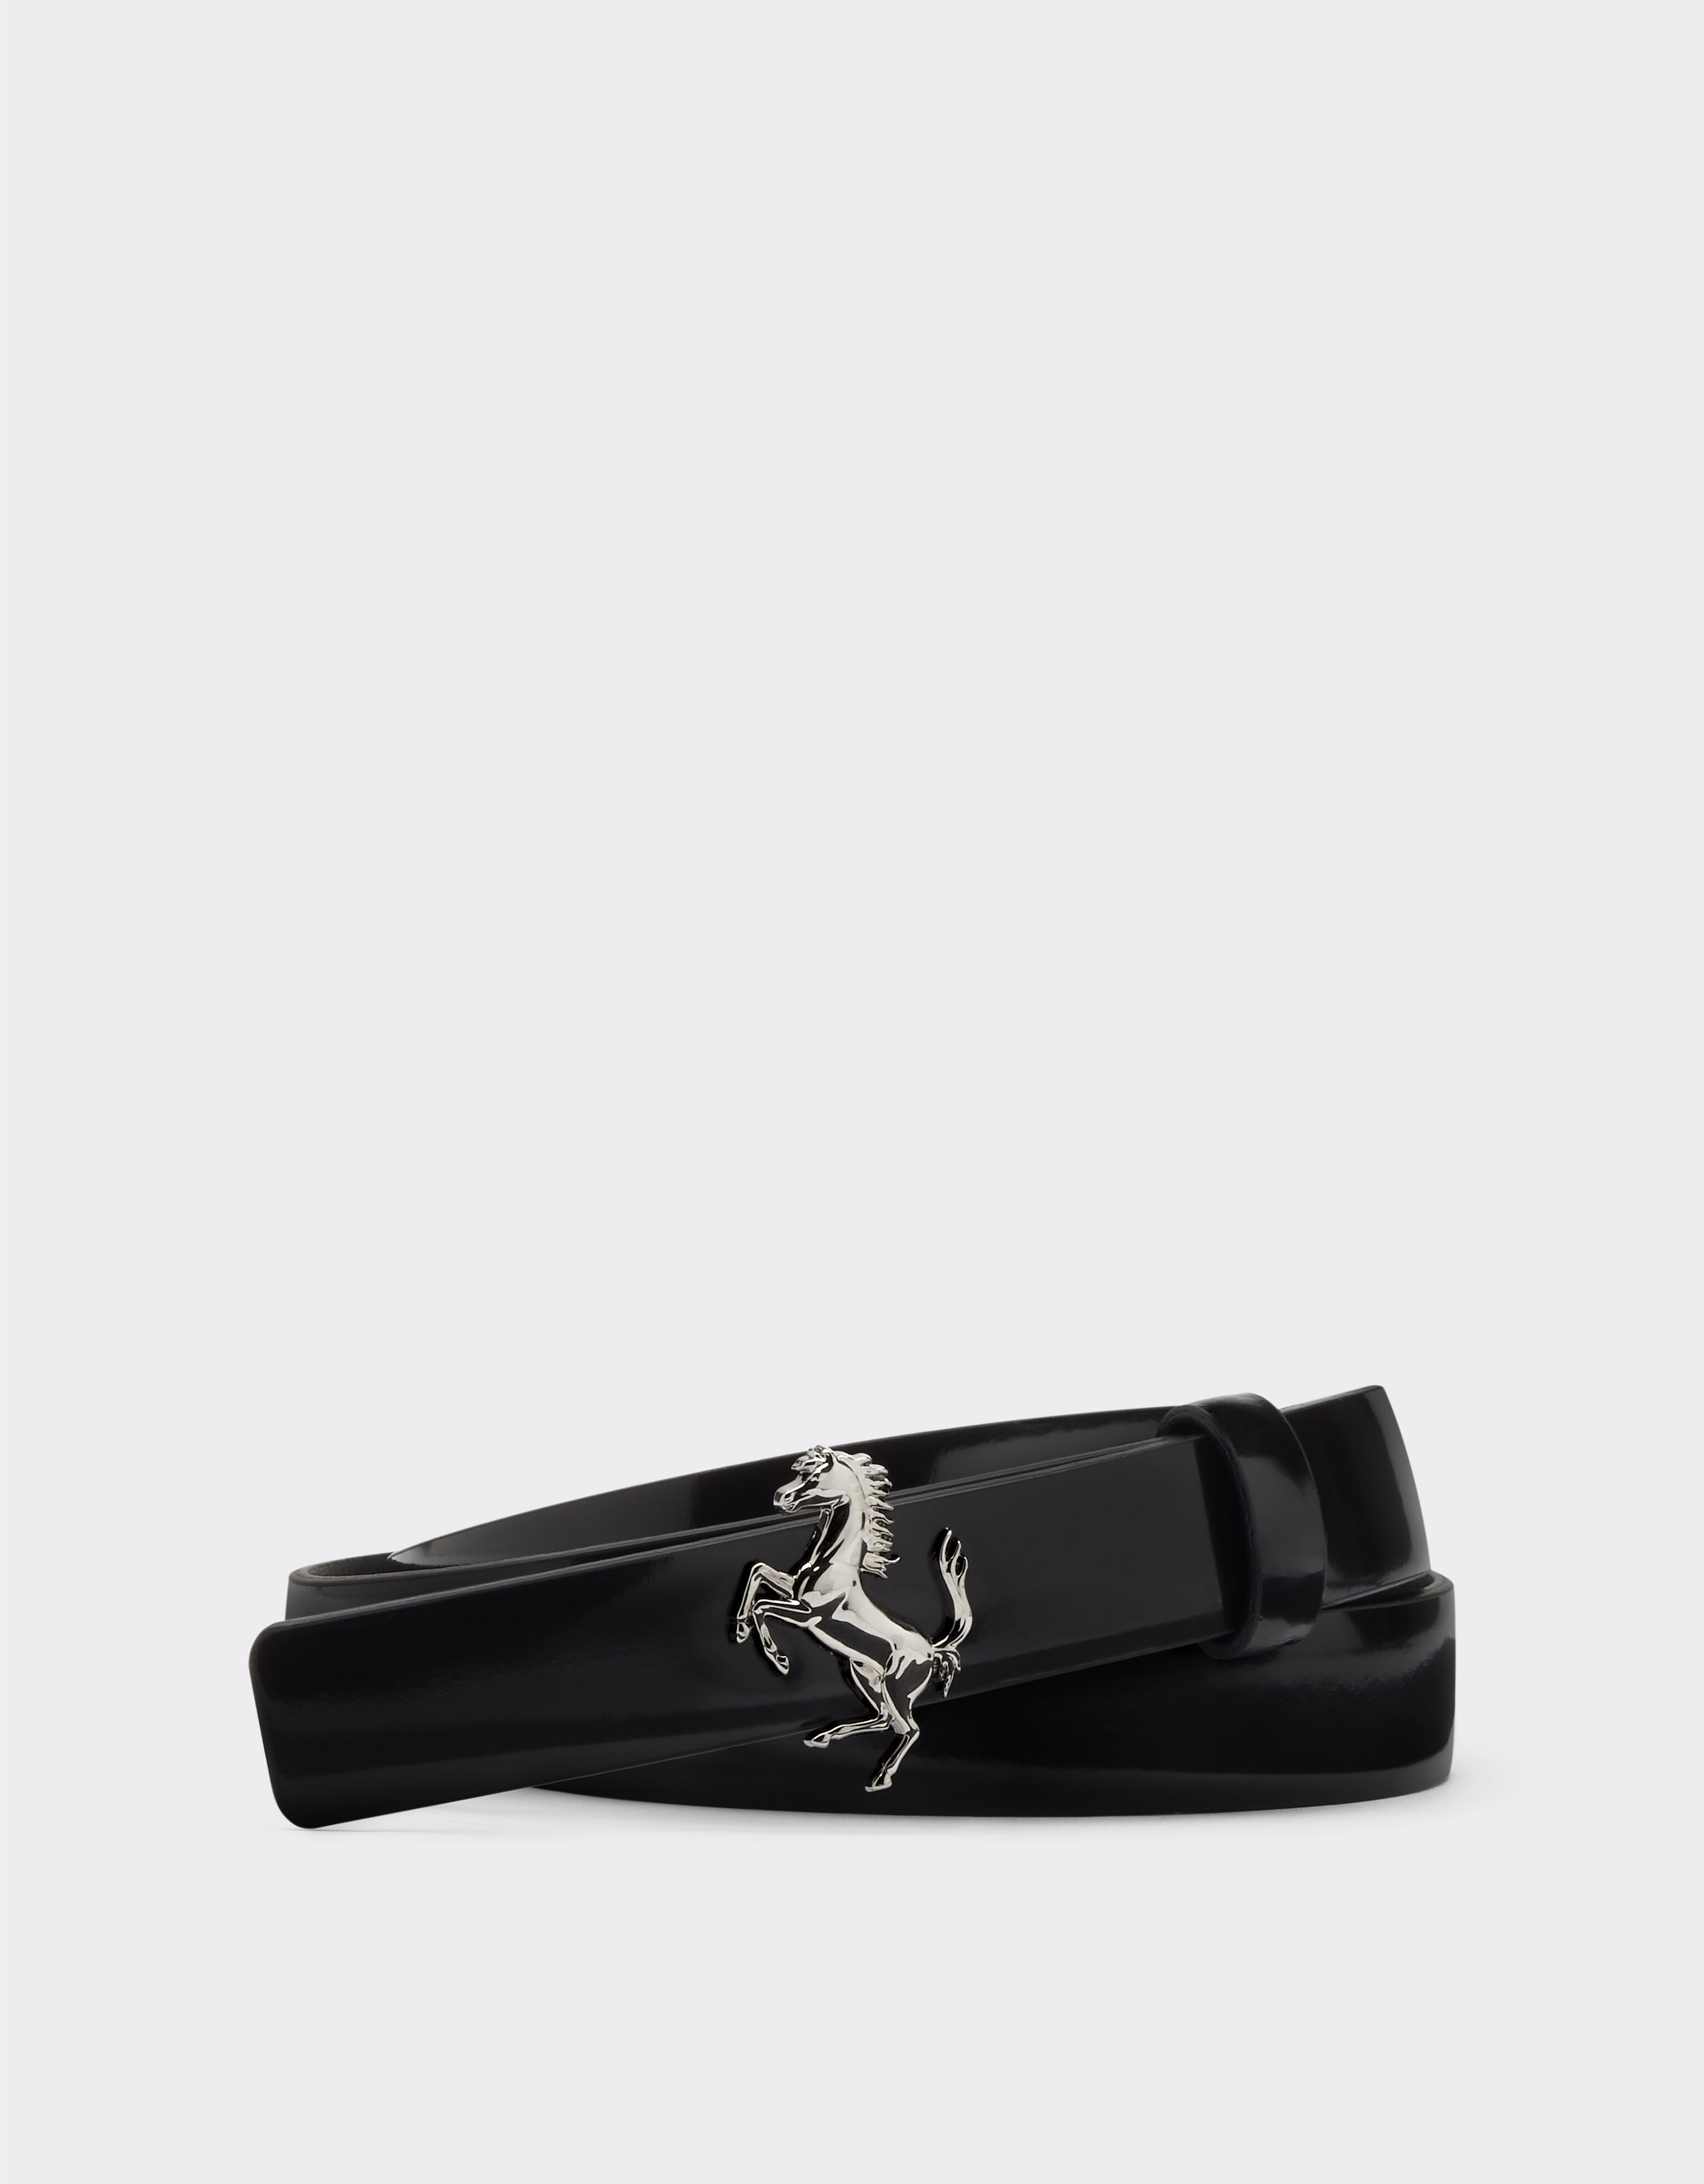 Ferrari Brushed leather belt with Prancing Horse Charcoal 20057f